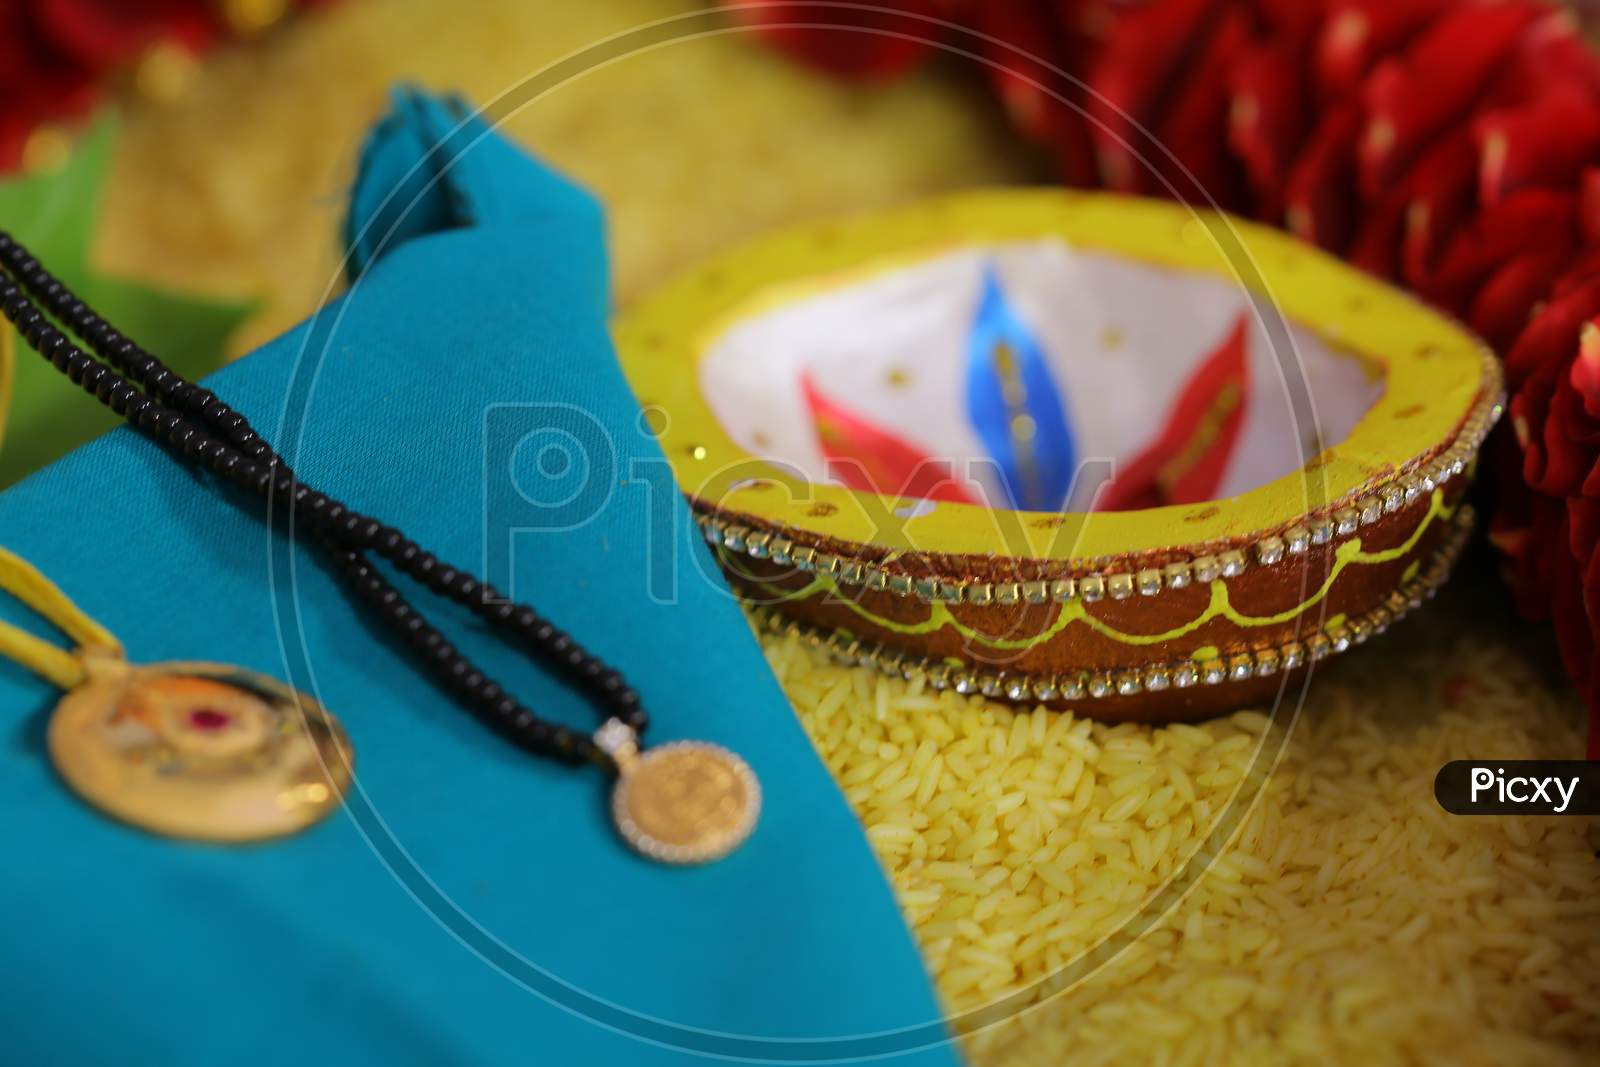 South Indian Bride engagement accessories during wedding puja